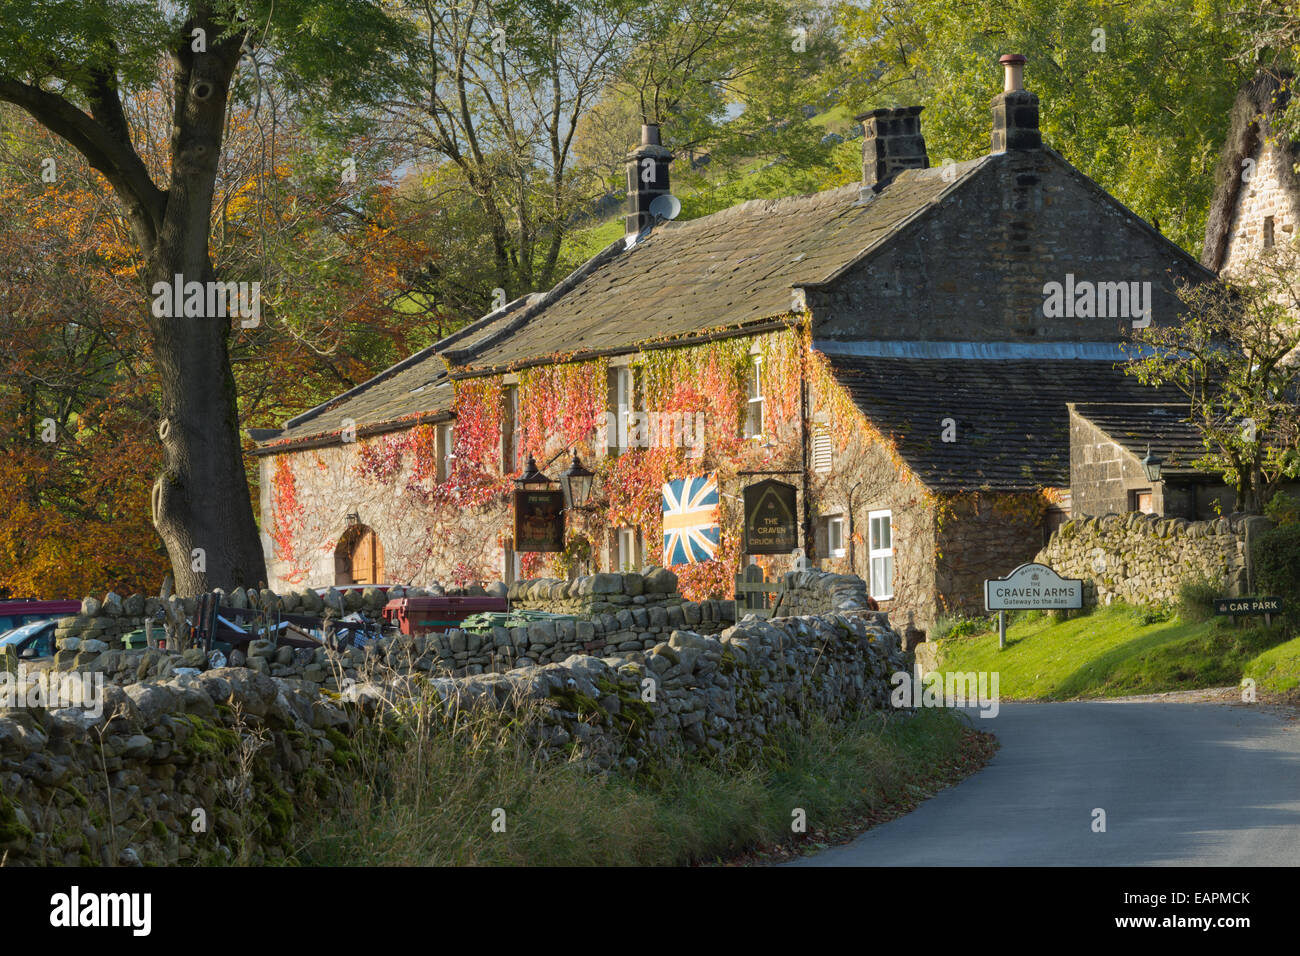 Die Craven Arms, Appletreewick, Wharfdale in The Yorkshire Dales, England. Stockfoto